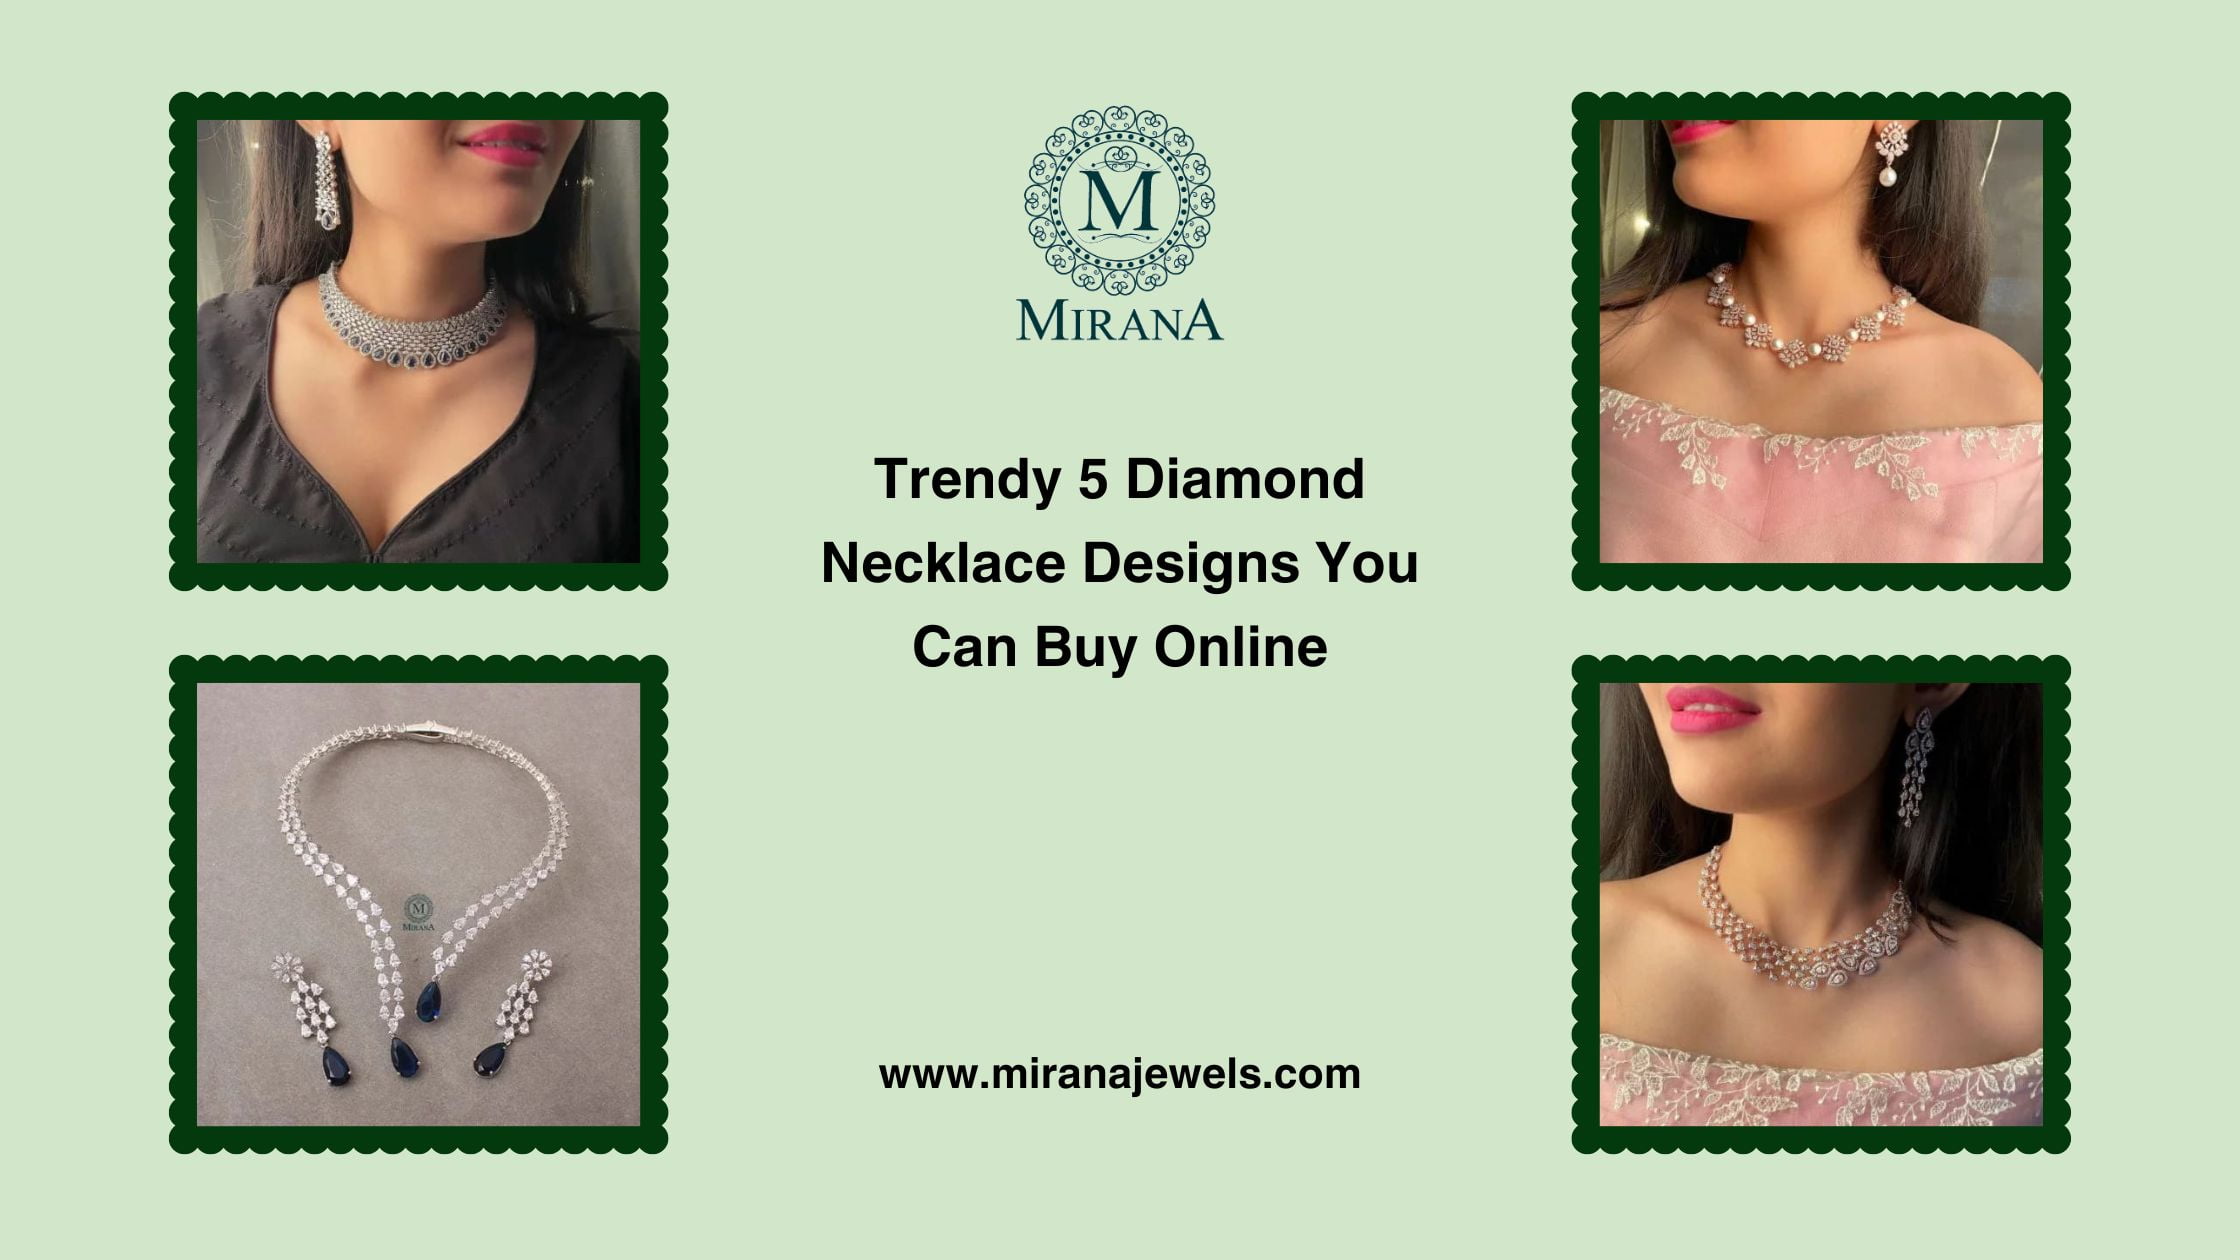 Trendy 5 Diamond Necklace Designs You Can Buy Online